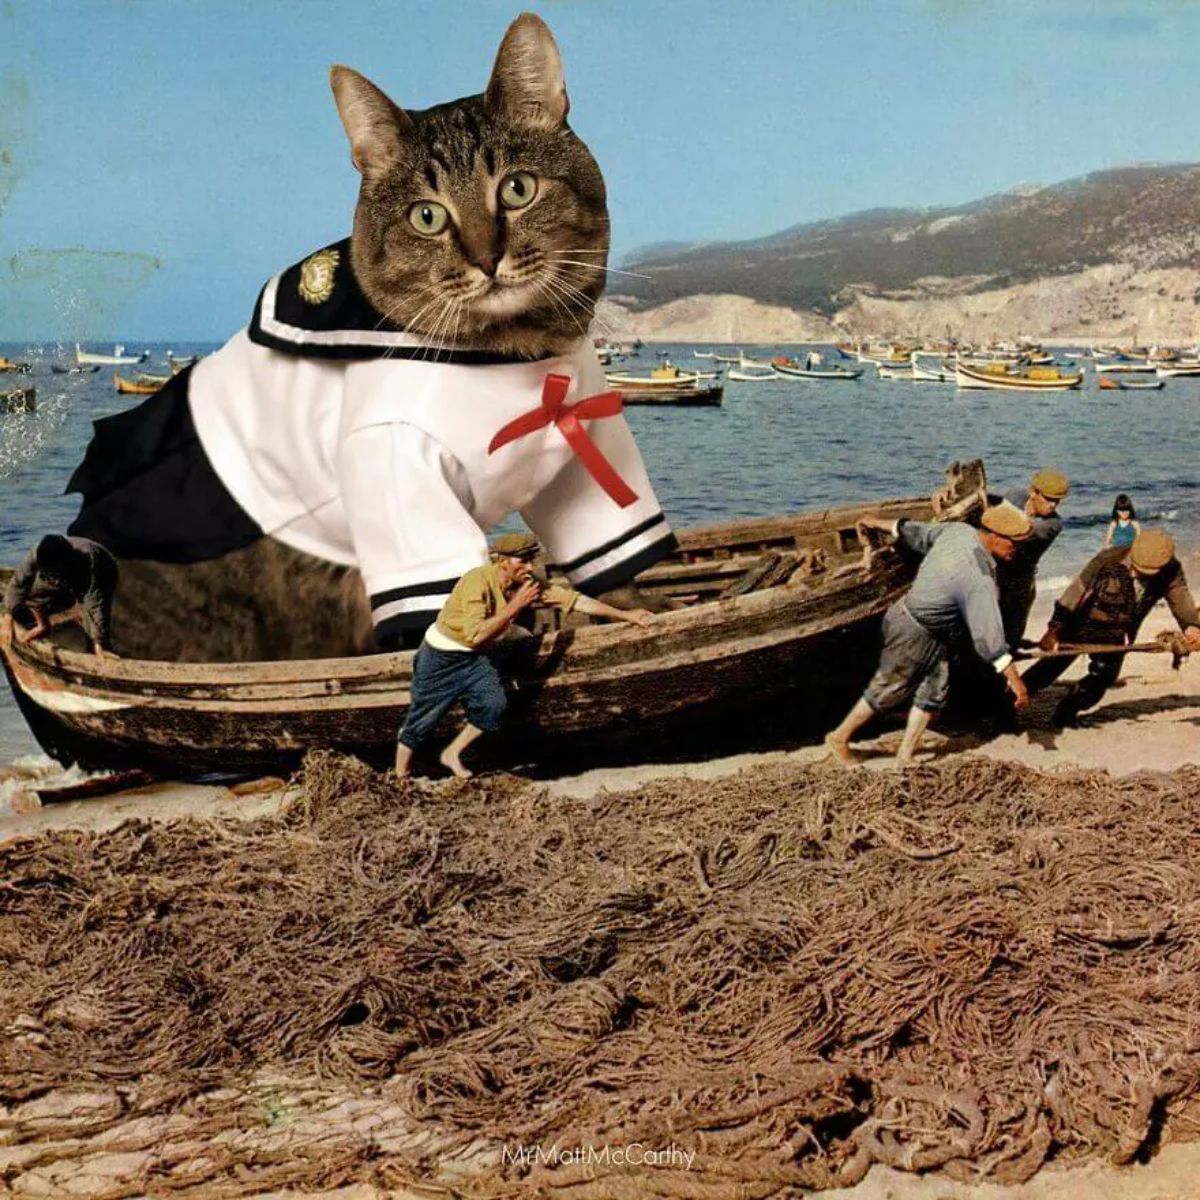 large photoshopped grey tabby cat in a blue and white sailor suit in a boat pulled by some men on a beach